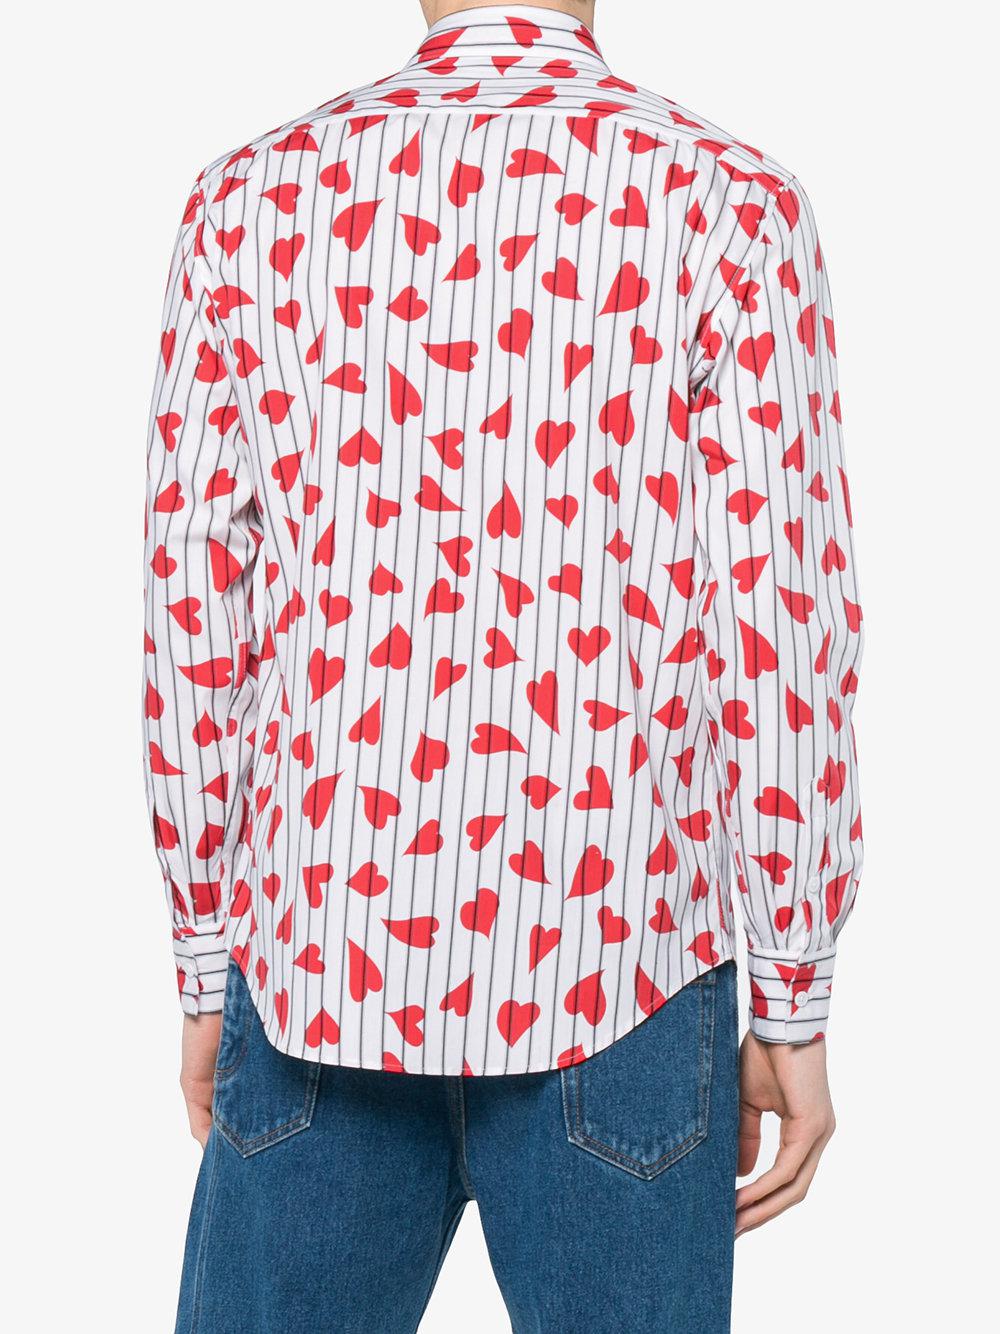 JW Anderson Heart Stripe Print Shirt in White for Men | Lyst Canada